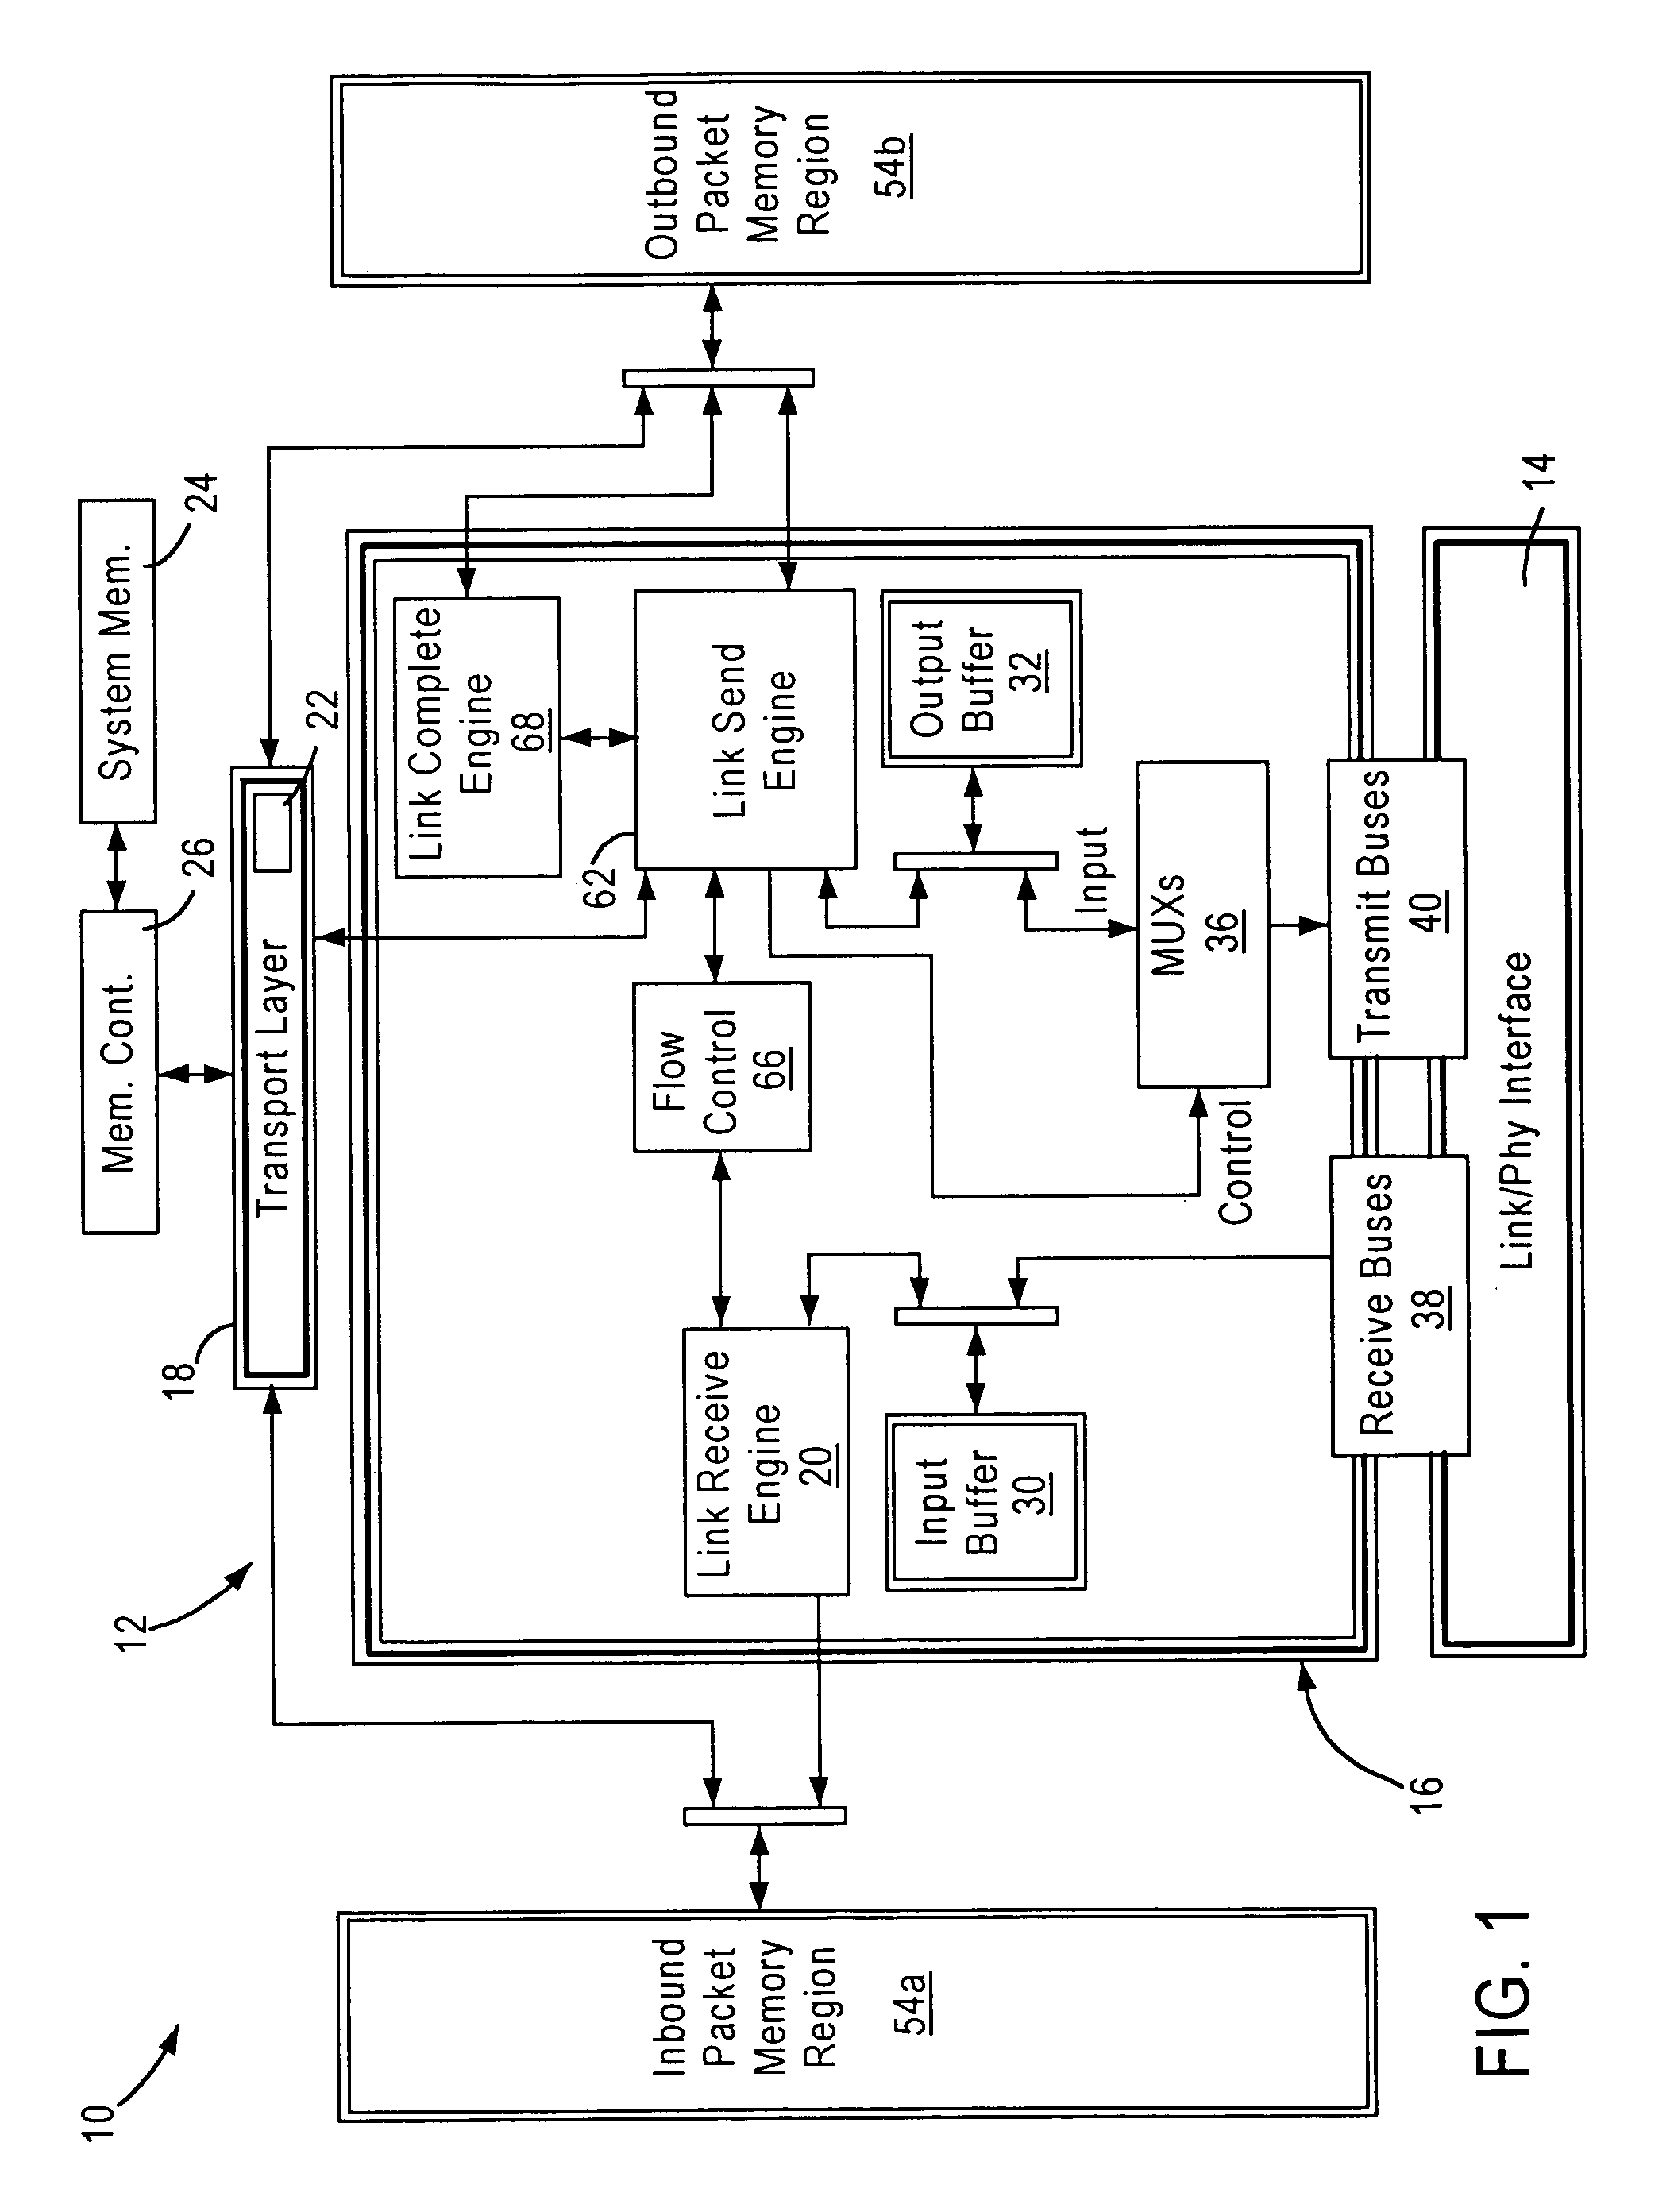 Arrangement in a channel adapter for validating headers concurrently during reception of a packet for minimal validation latency